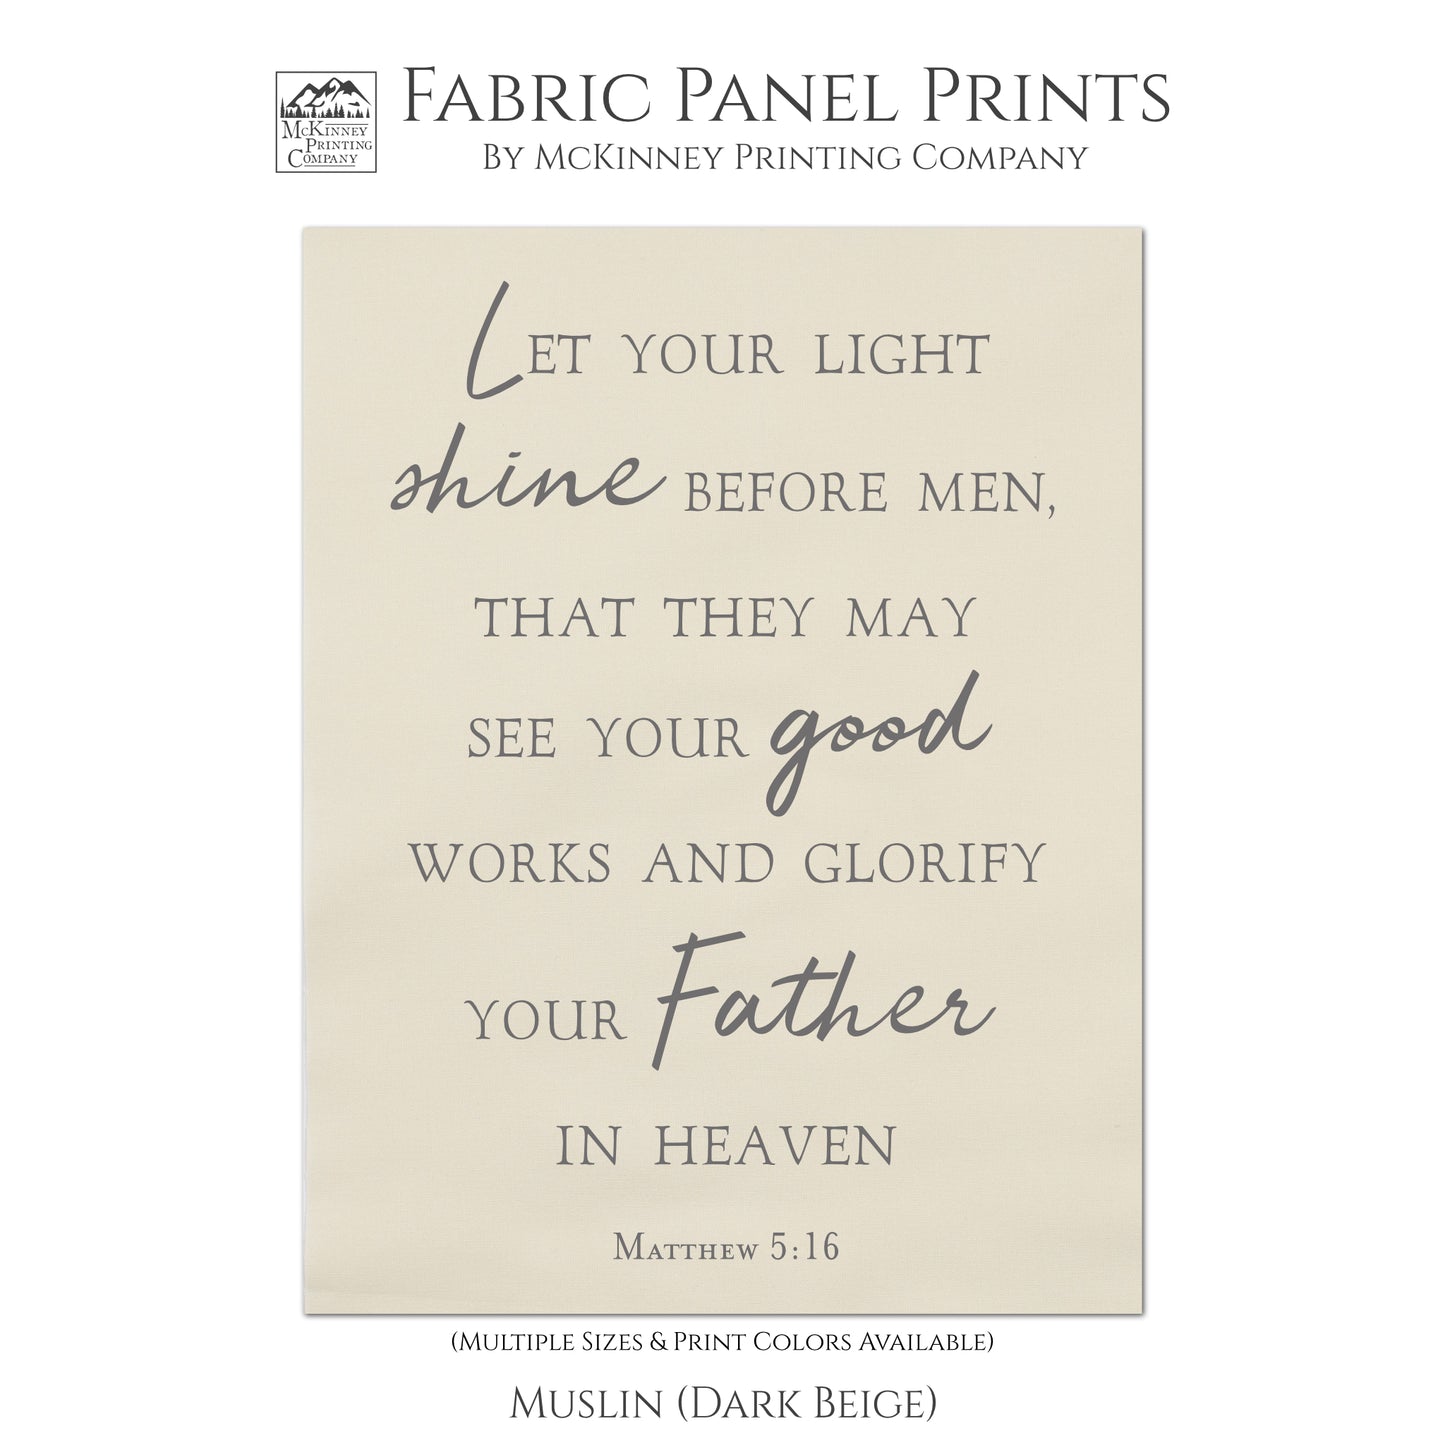 Let your light shine before men, that they may see your good works and glorify your Father in heaven. - Matthew 5 16, Fabric Panel Print - Muslin